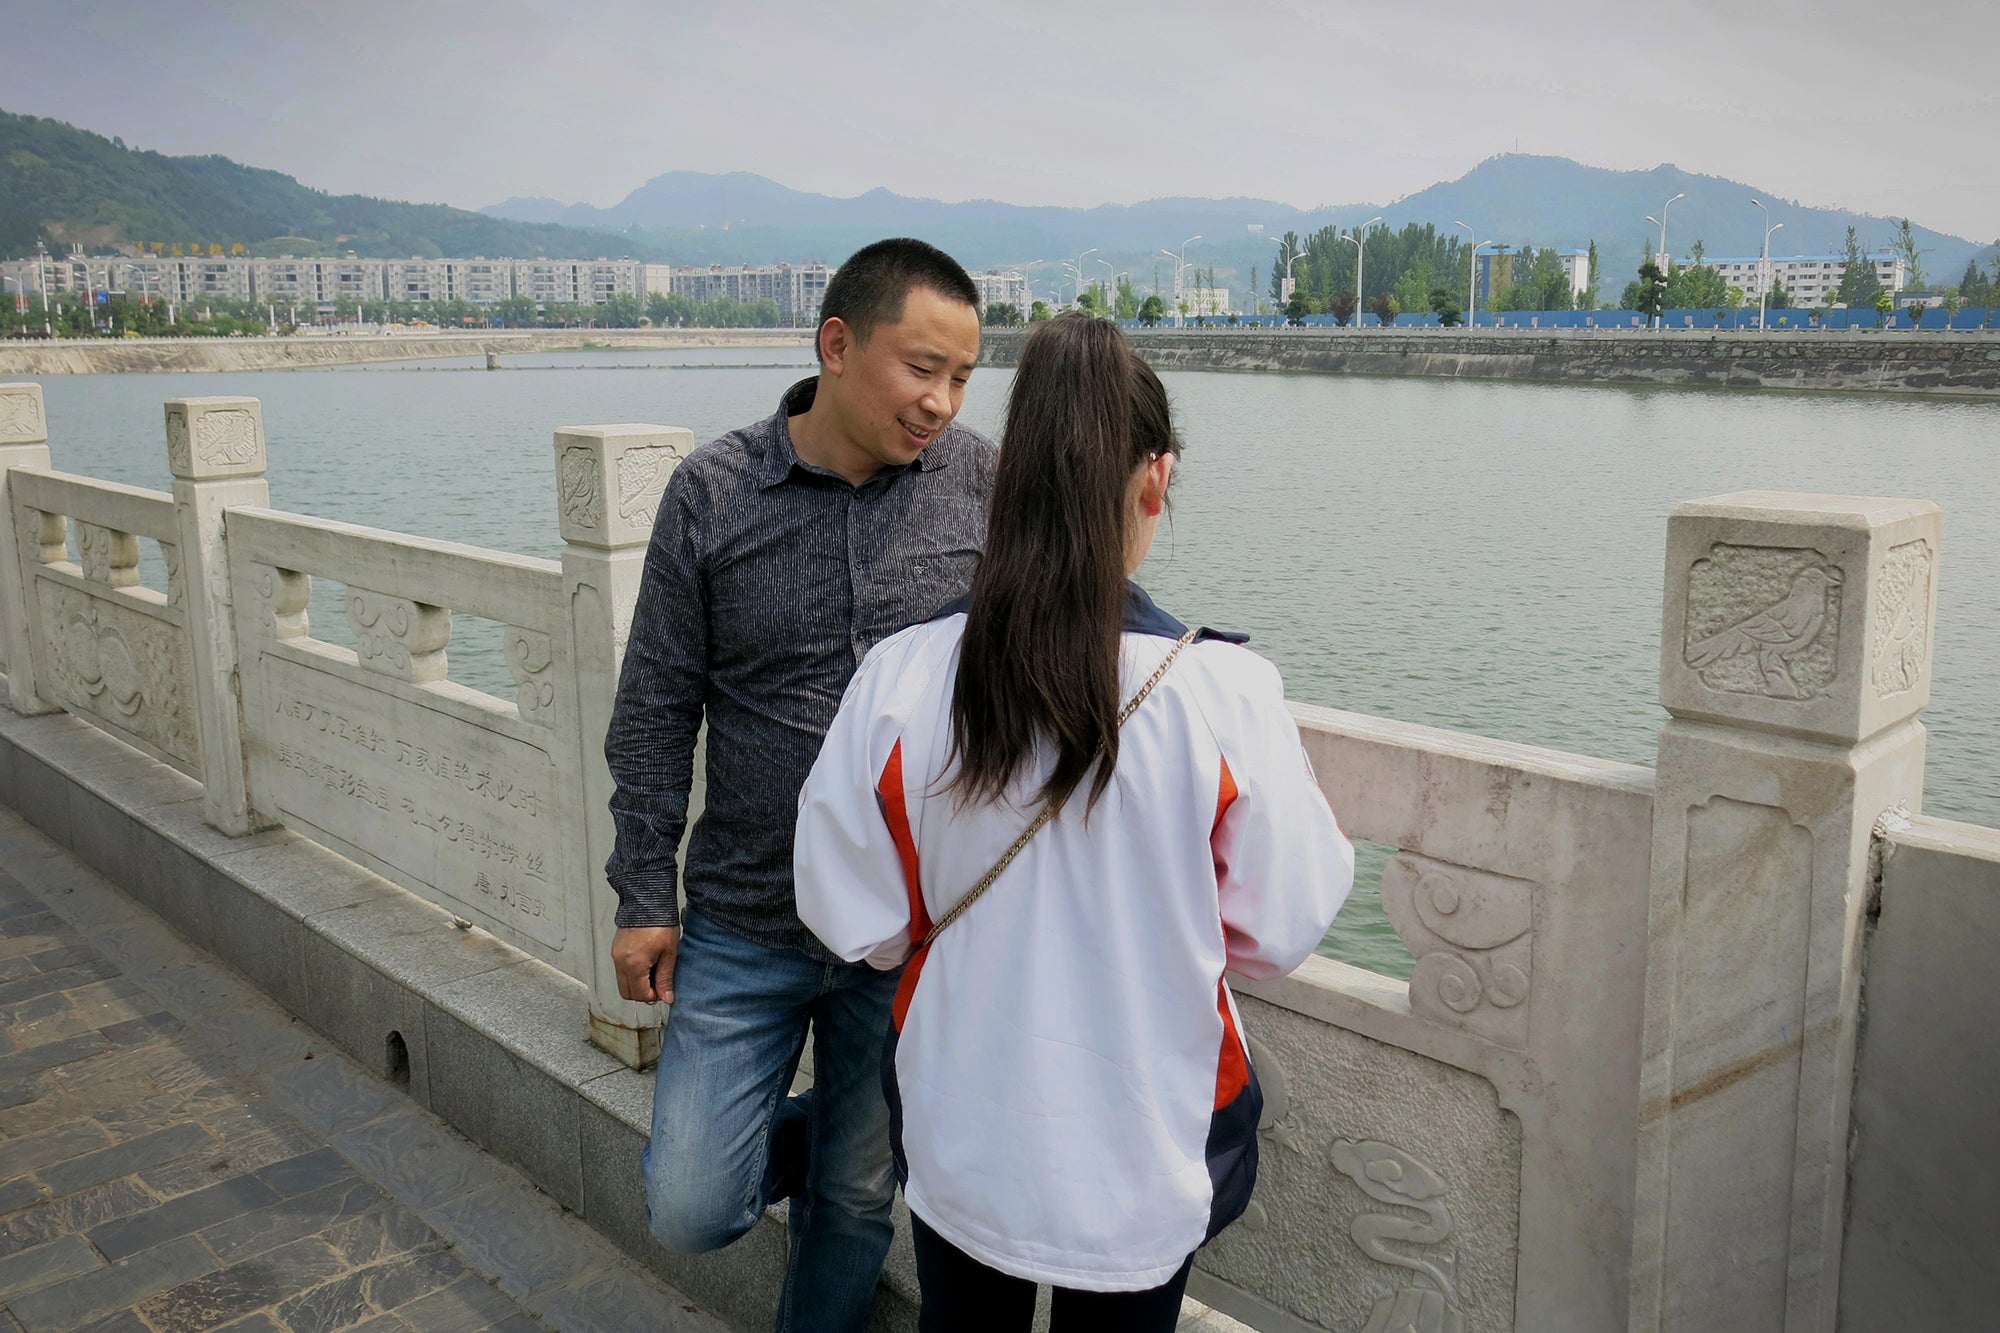 Cheng Zhu, 43, talks to his daughter Cheng Ying, 16, who is reunited with him after being abducted in 2005